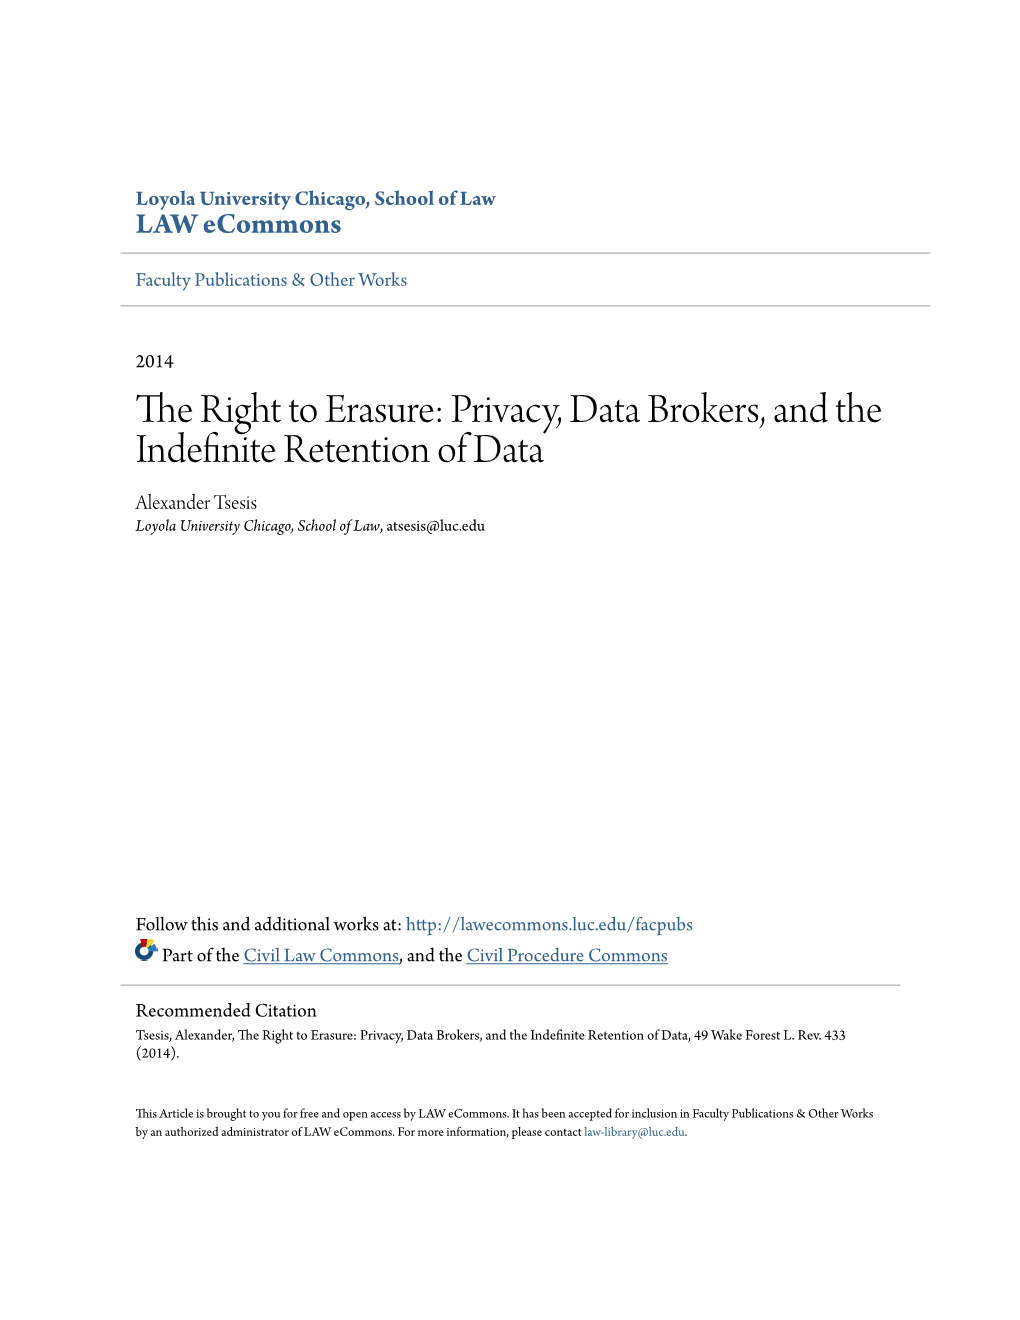 The Right to Erasure: Privacy, Data Brokers, and the Indefinite Retention of Data Alexander Tsesis Loyola University Chicago, School of Law, Atsesis@Luc.Edu